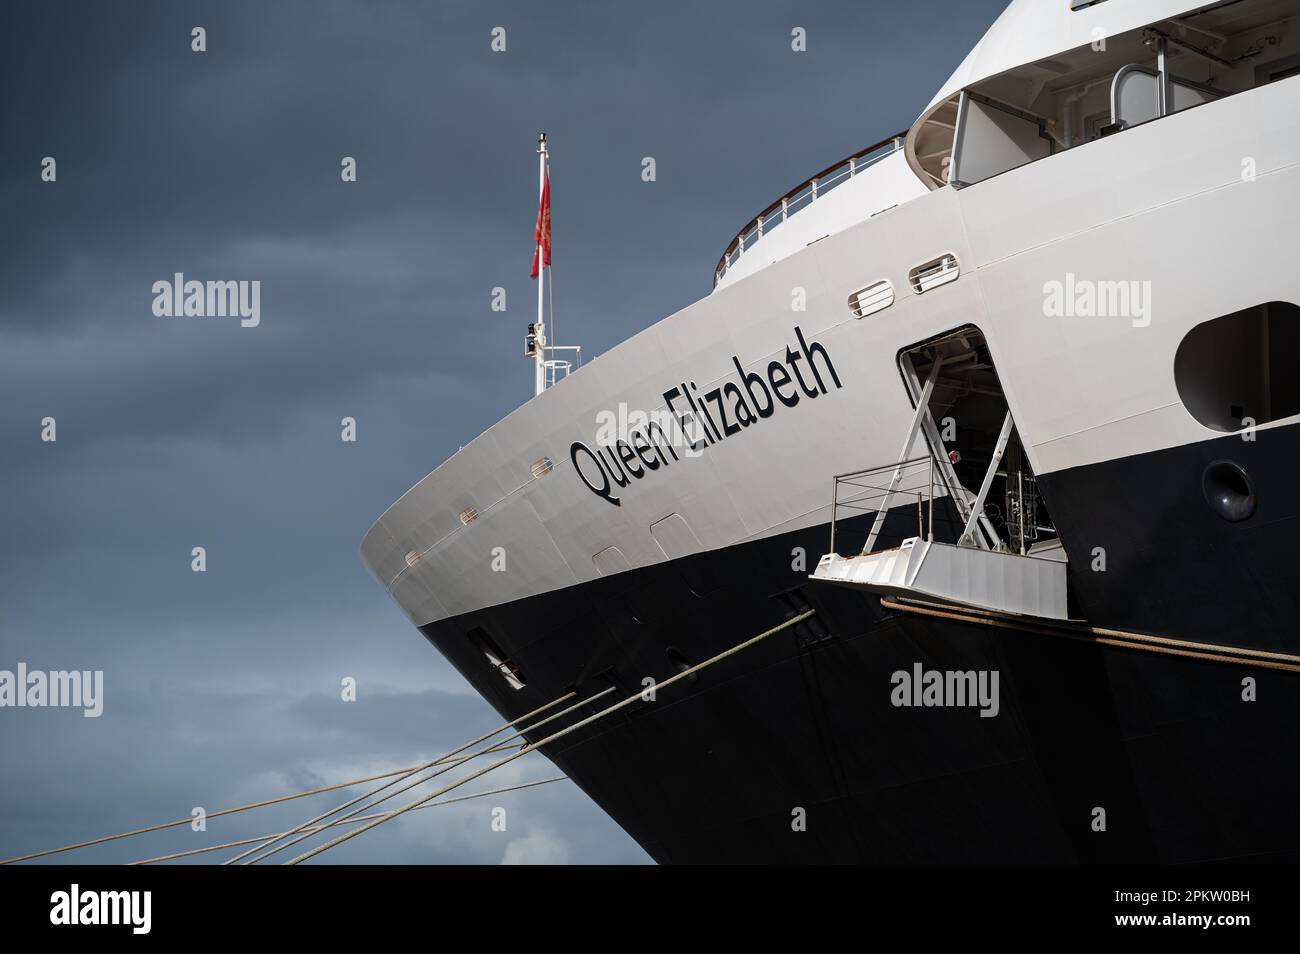 A view of the bow and open bow door of the Cunard Queen Elizabeth cruiseship against a blue sky docked at Cairns Wharf, QLD, Australia. Stock Photo